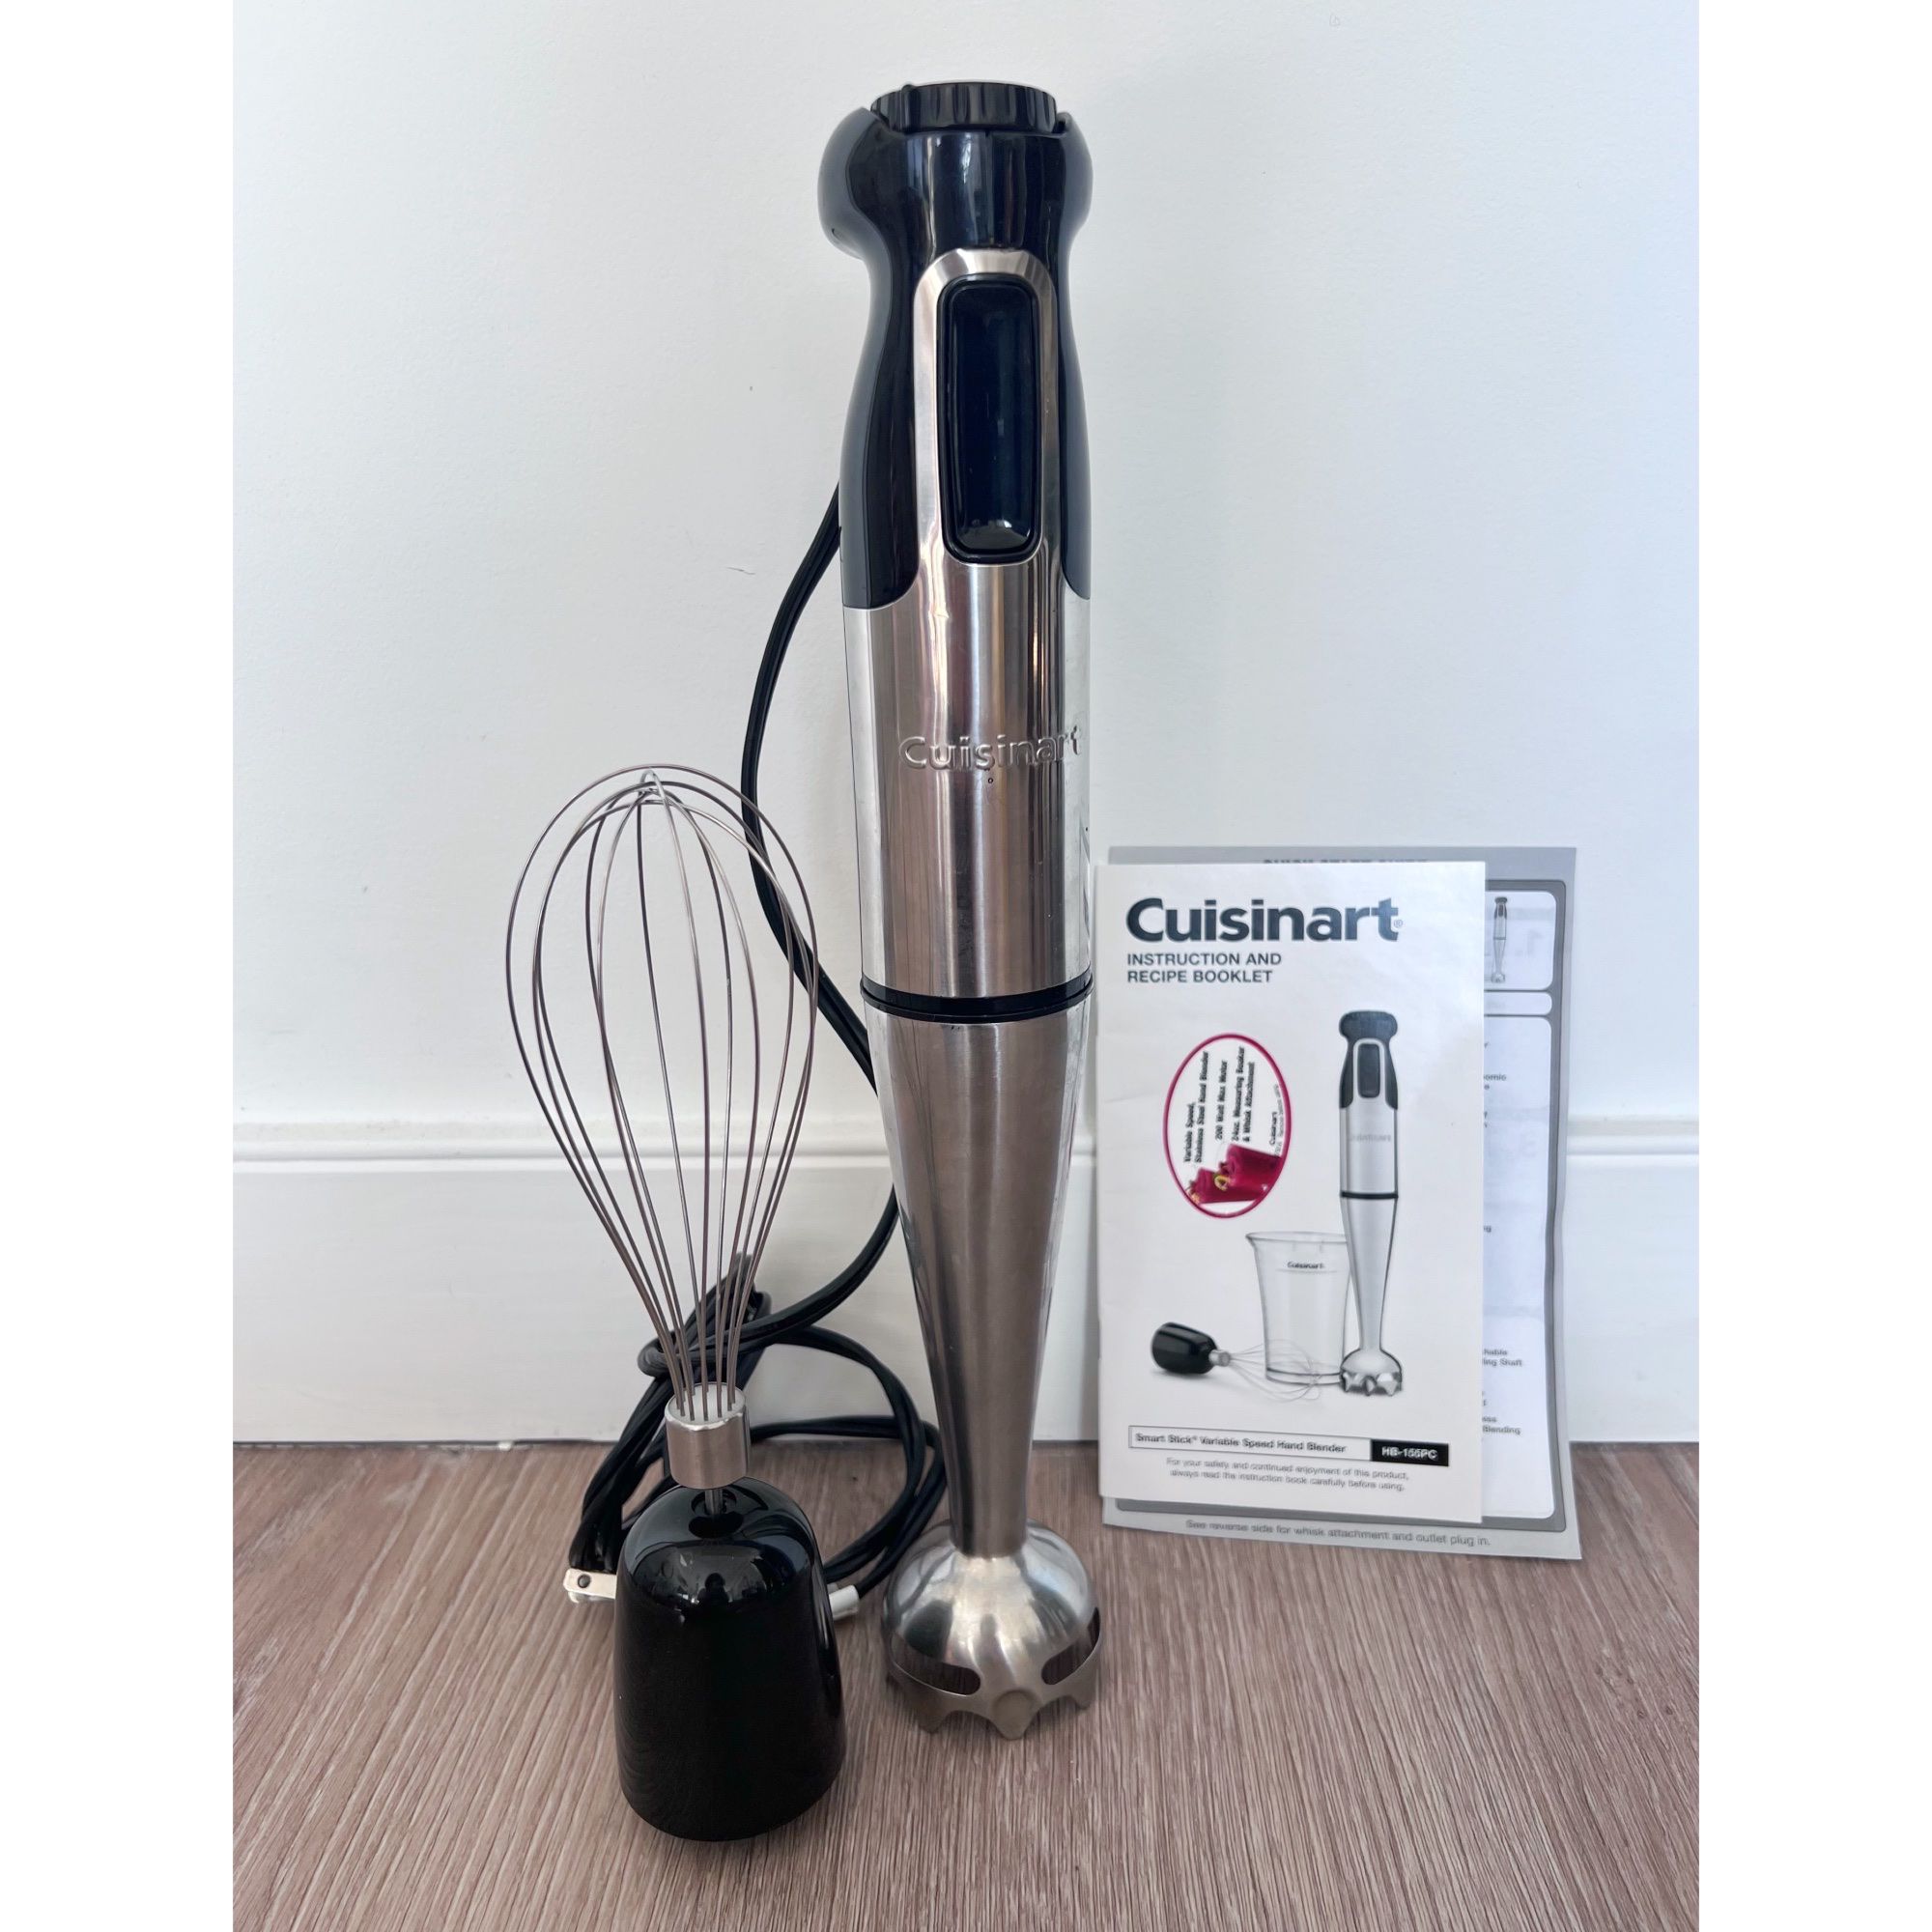 Cuisinart immersion stick hand blender with blending blade and